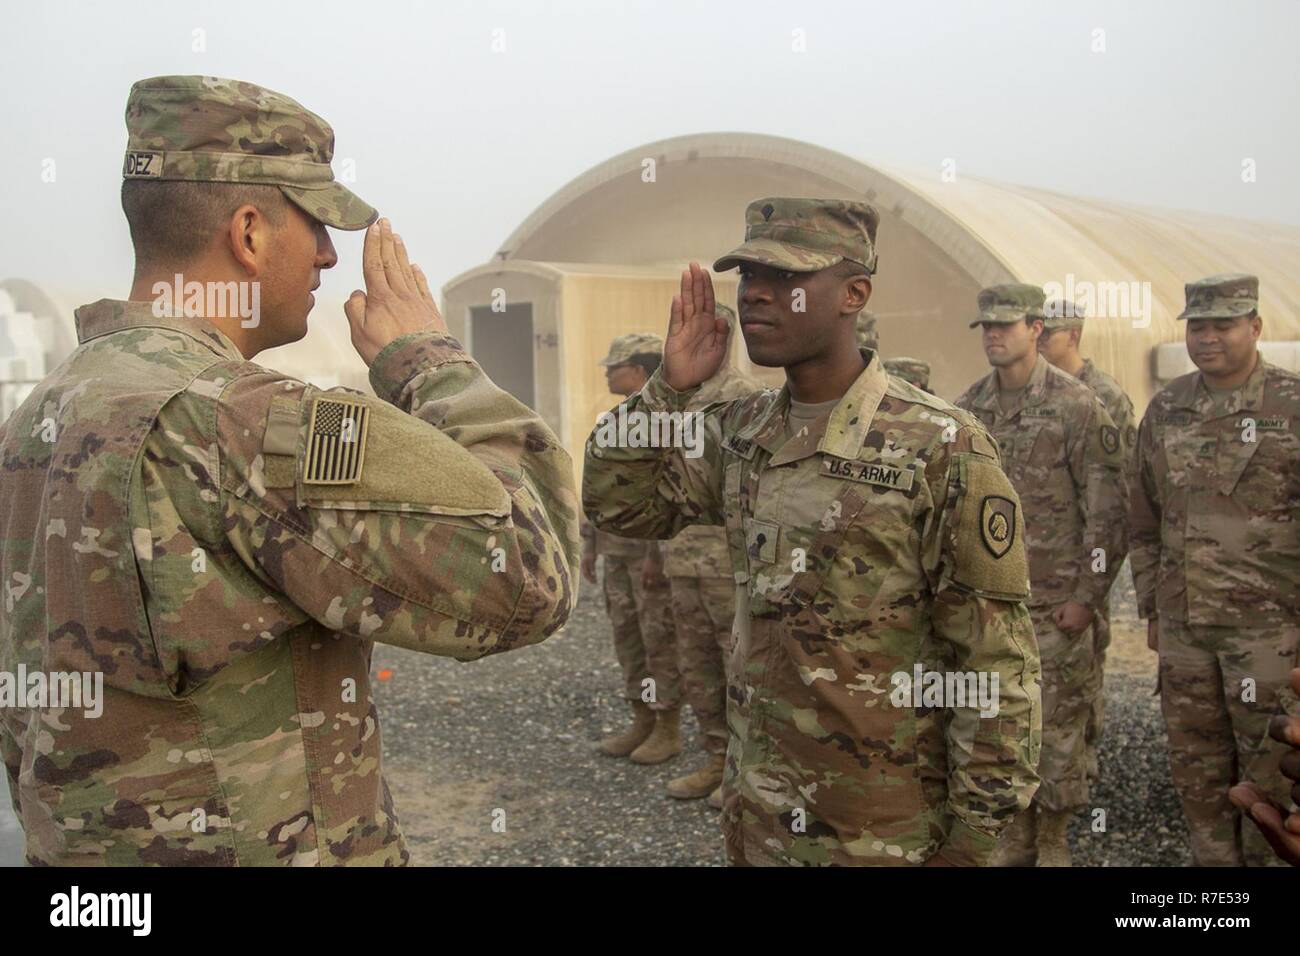 Spc. Andrew Miller salutes Capt. Diego Hernandez, Company Commander, for the last time as a Spc during his promotion ceremony to Sgt on Dec. 01, 2018, Camp Arifjan, Kuwait. Stock Photo